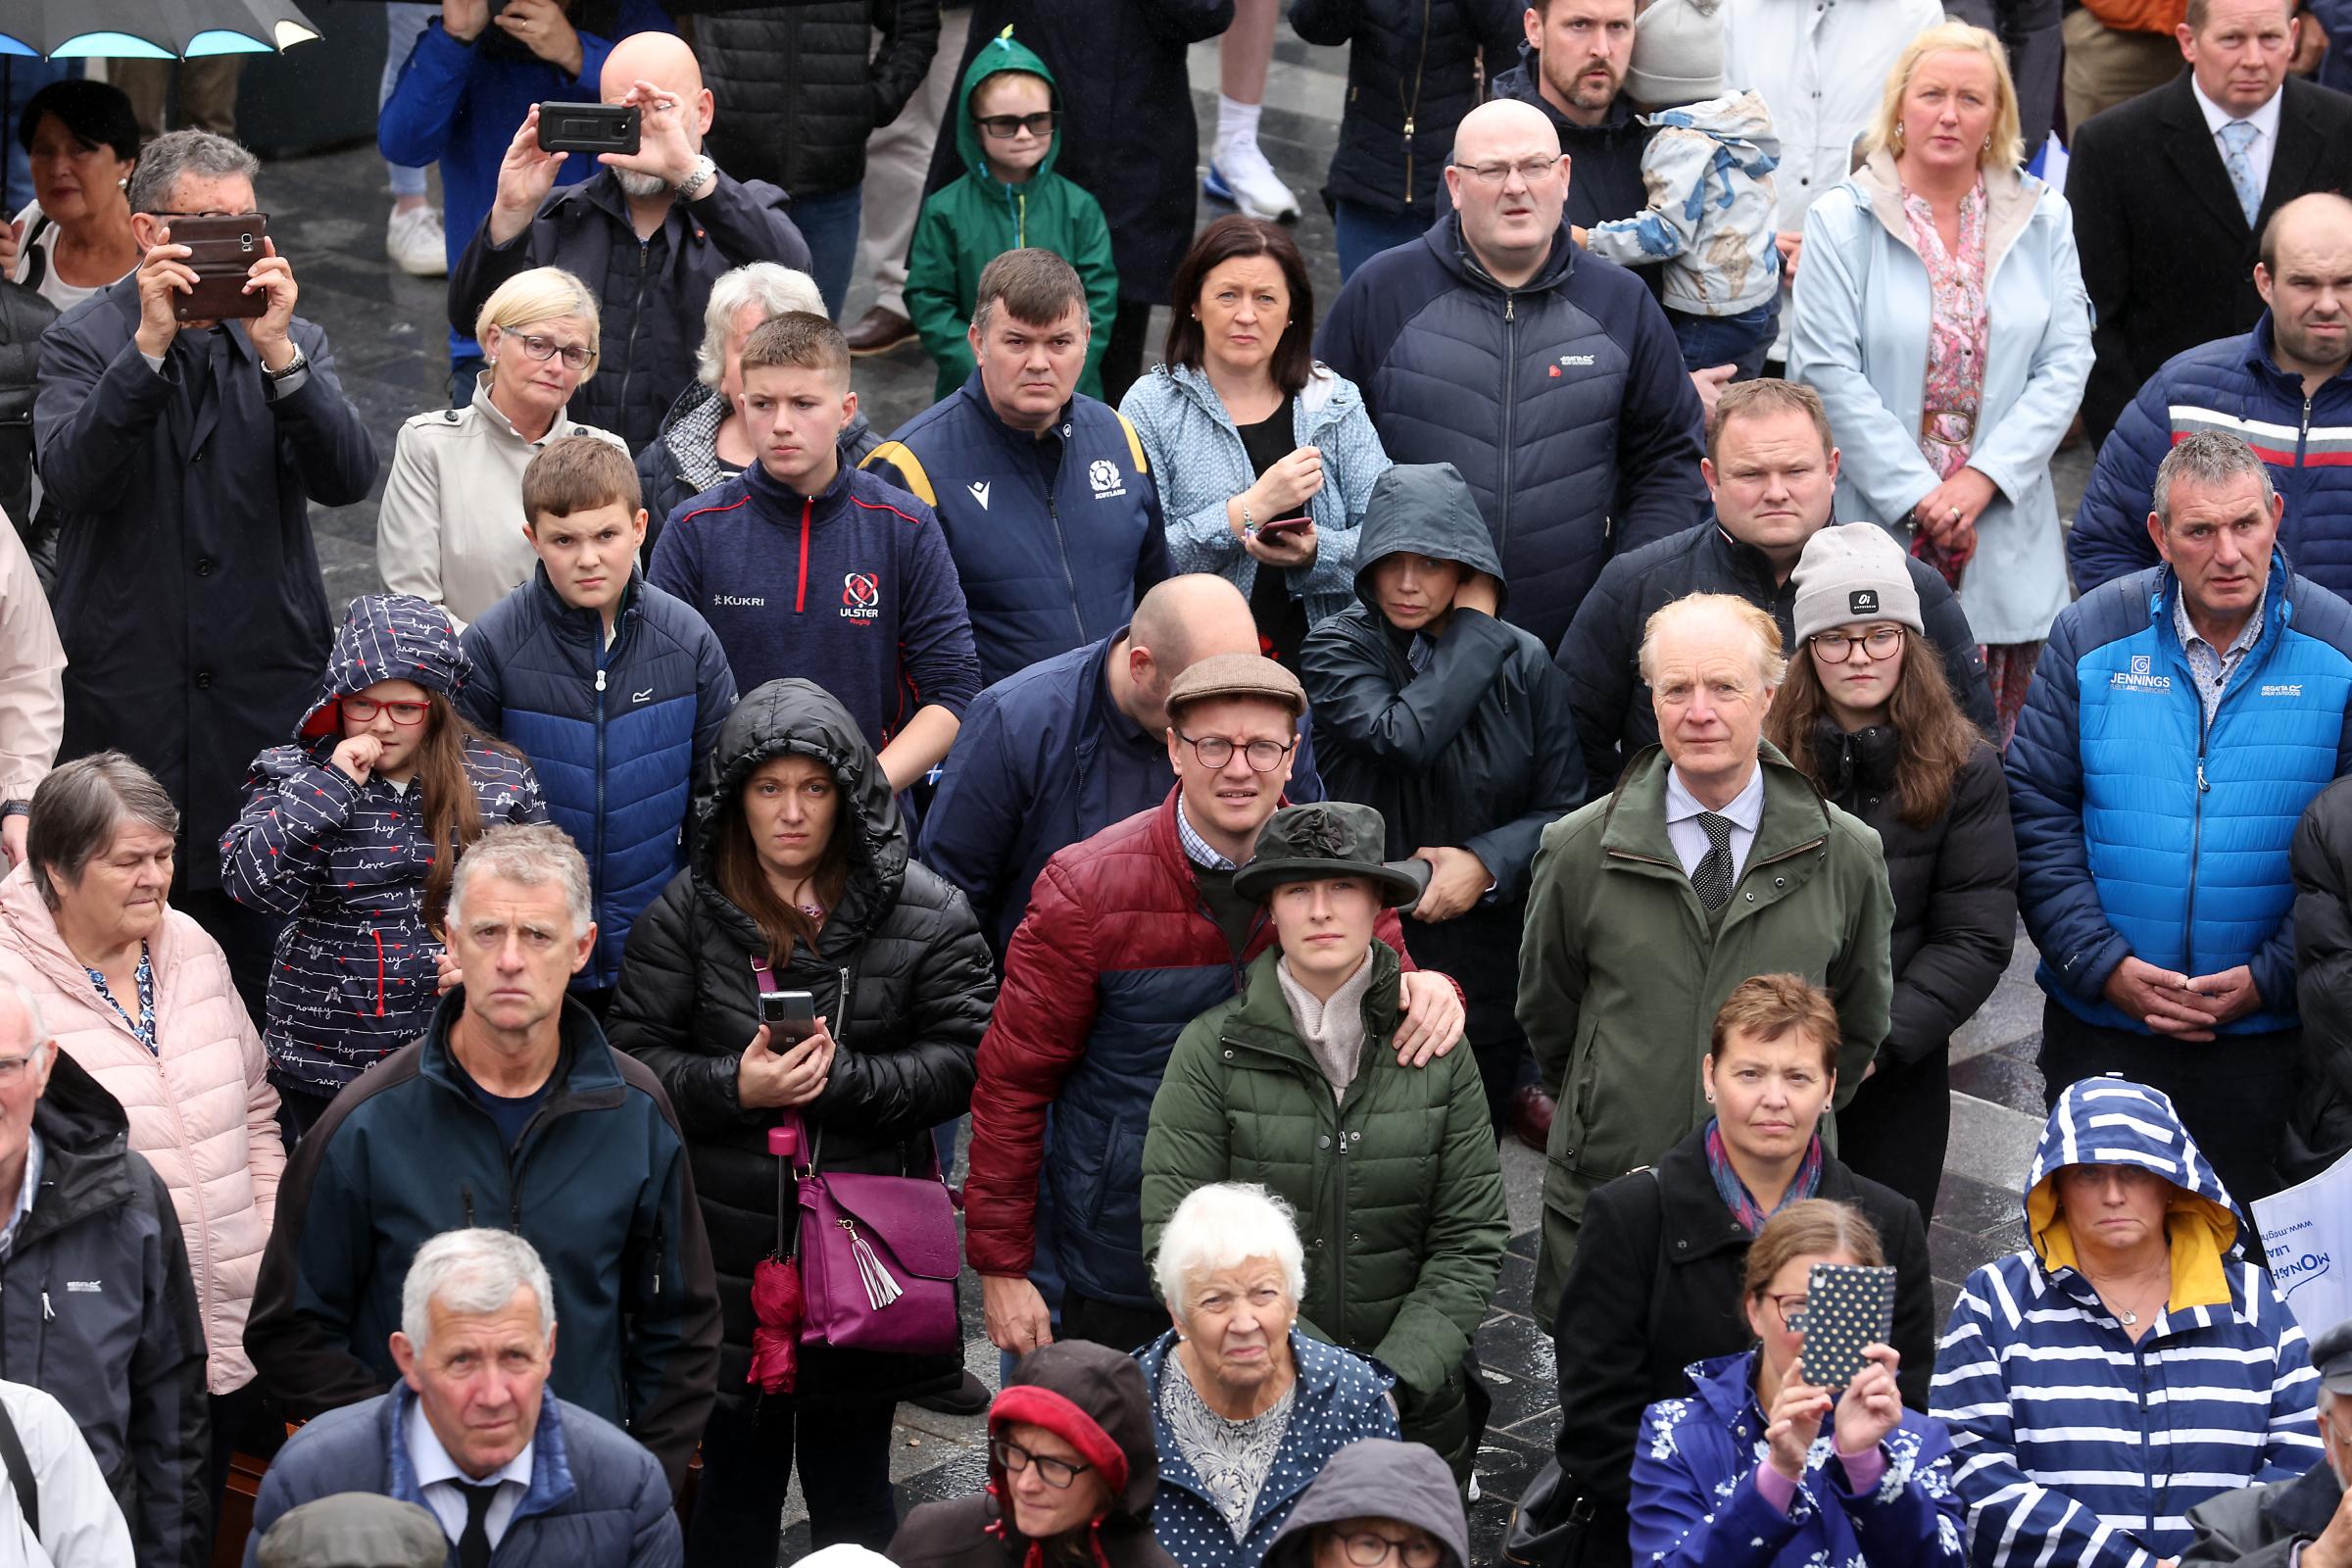 Members of the public watching and listening to The Accession Proclamation being read out by Patrick O’Doherty, The High Sheriff of Co.Fermanagh.